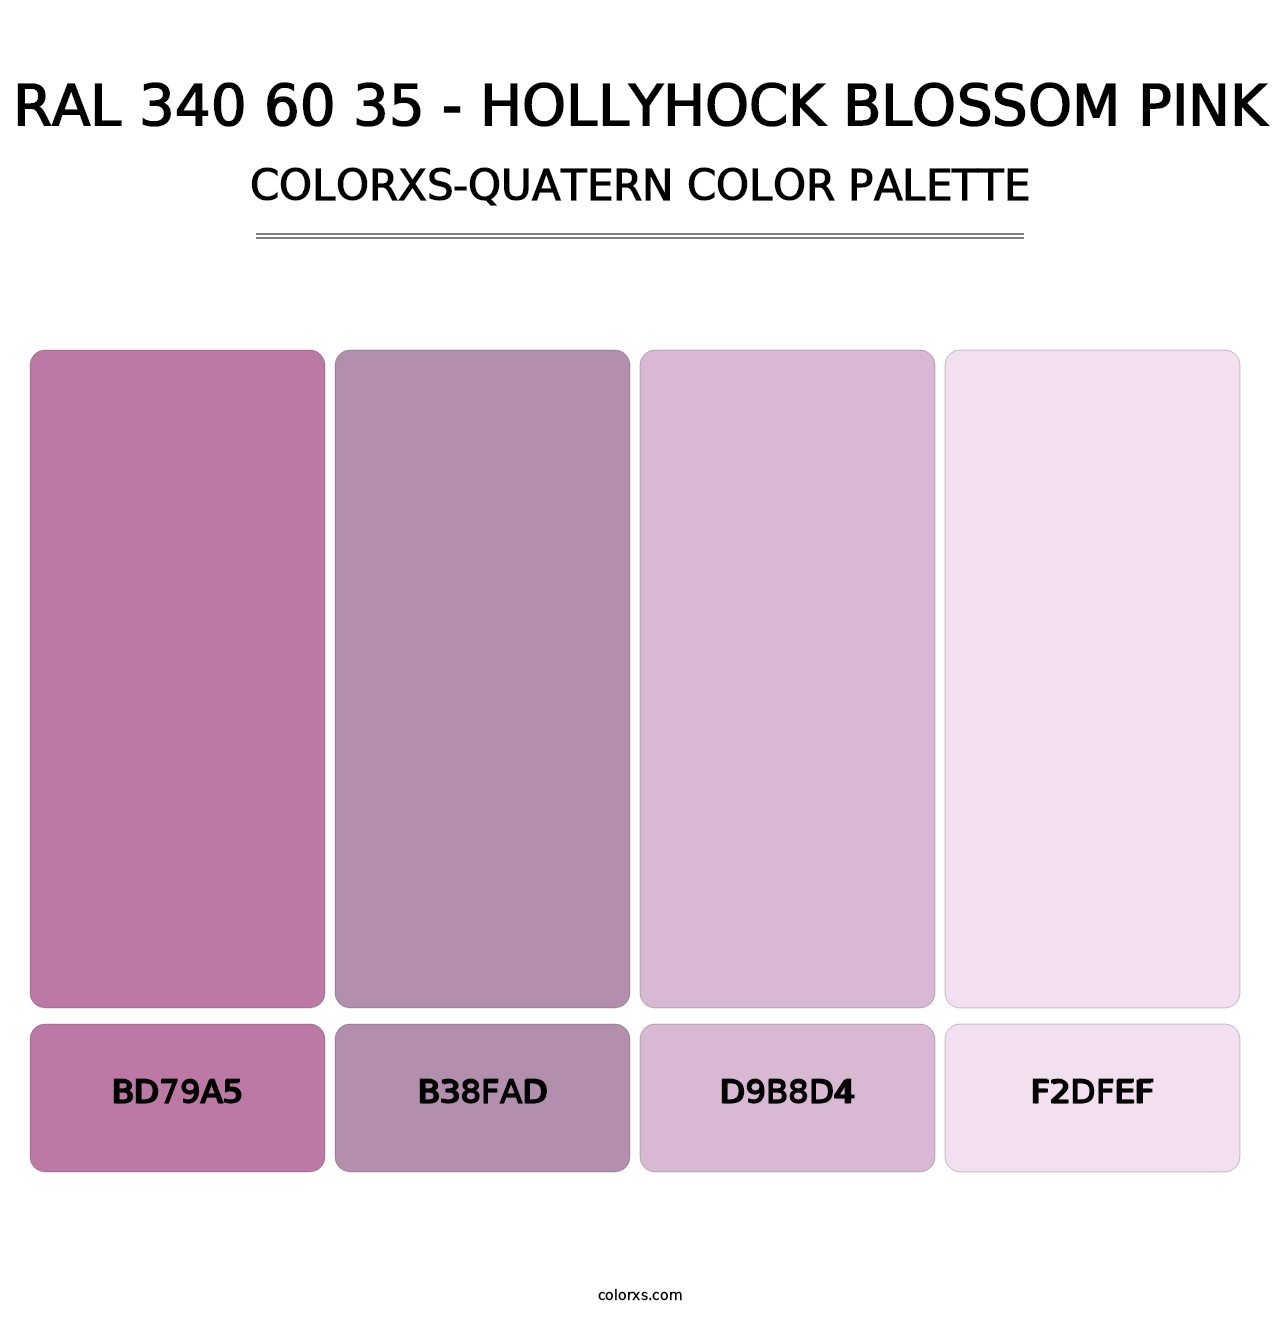 RAL 340 60 35 - Hollyhock Blossom Pink - Colorxs Quatern Palette